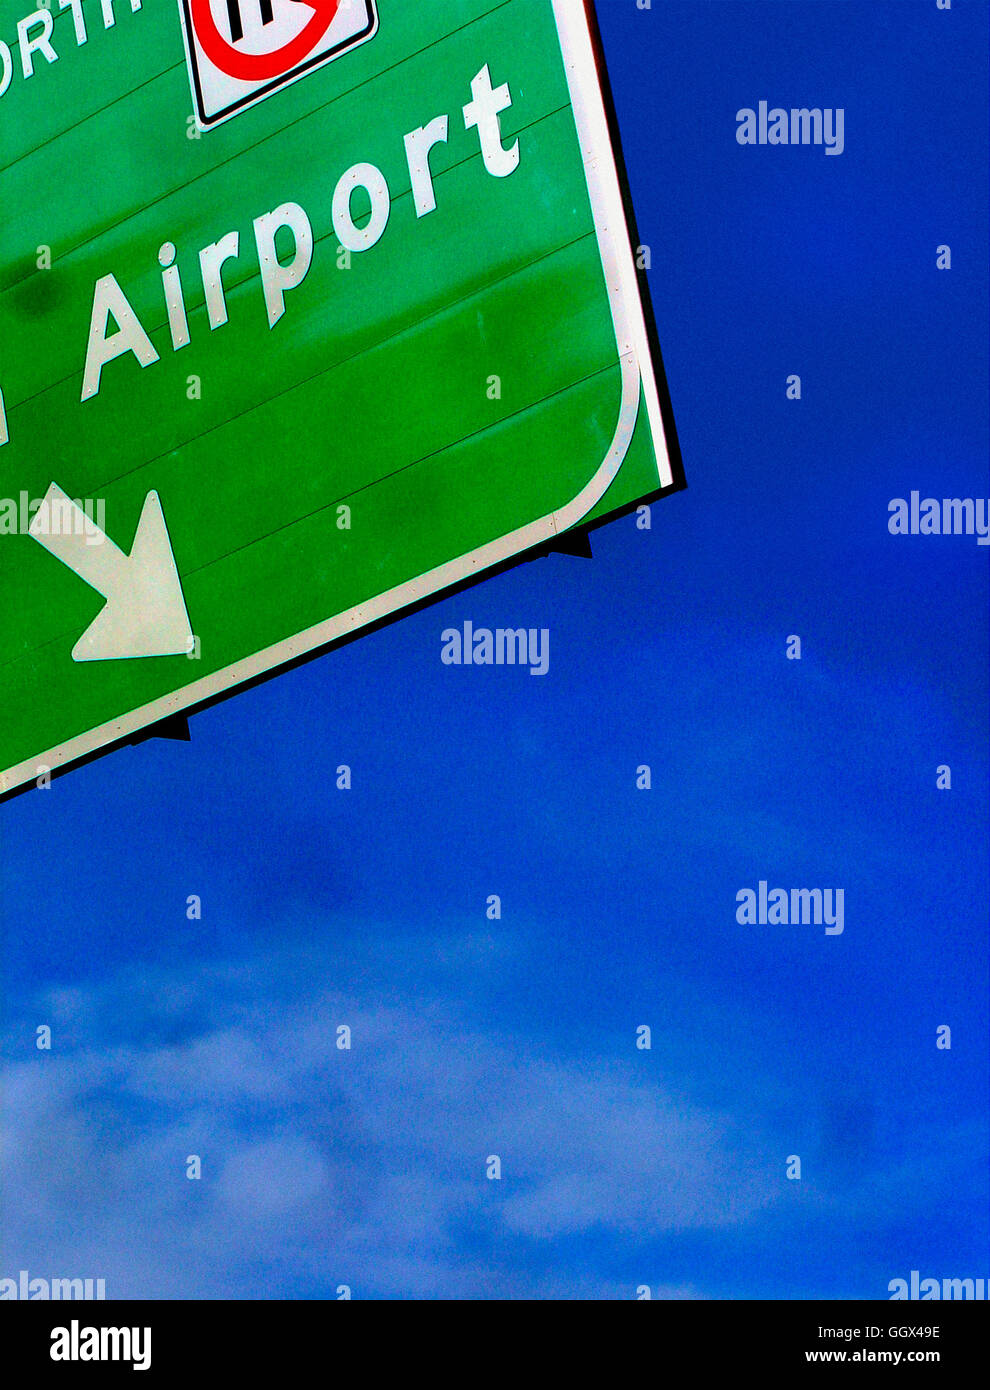 Urban Scene of Airport Sign With Directional Arrow Against a Clear Blue Sky Copy Space Stock Photo